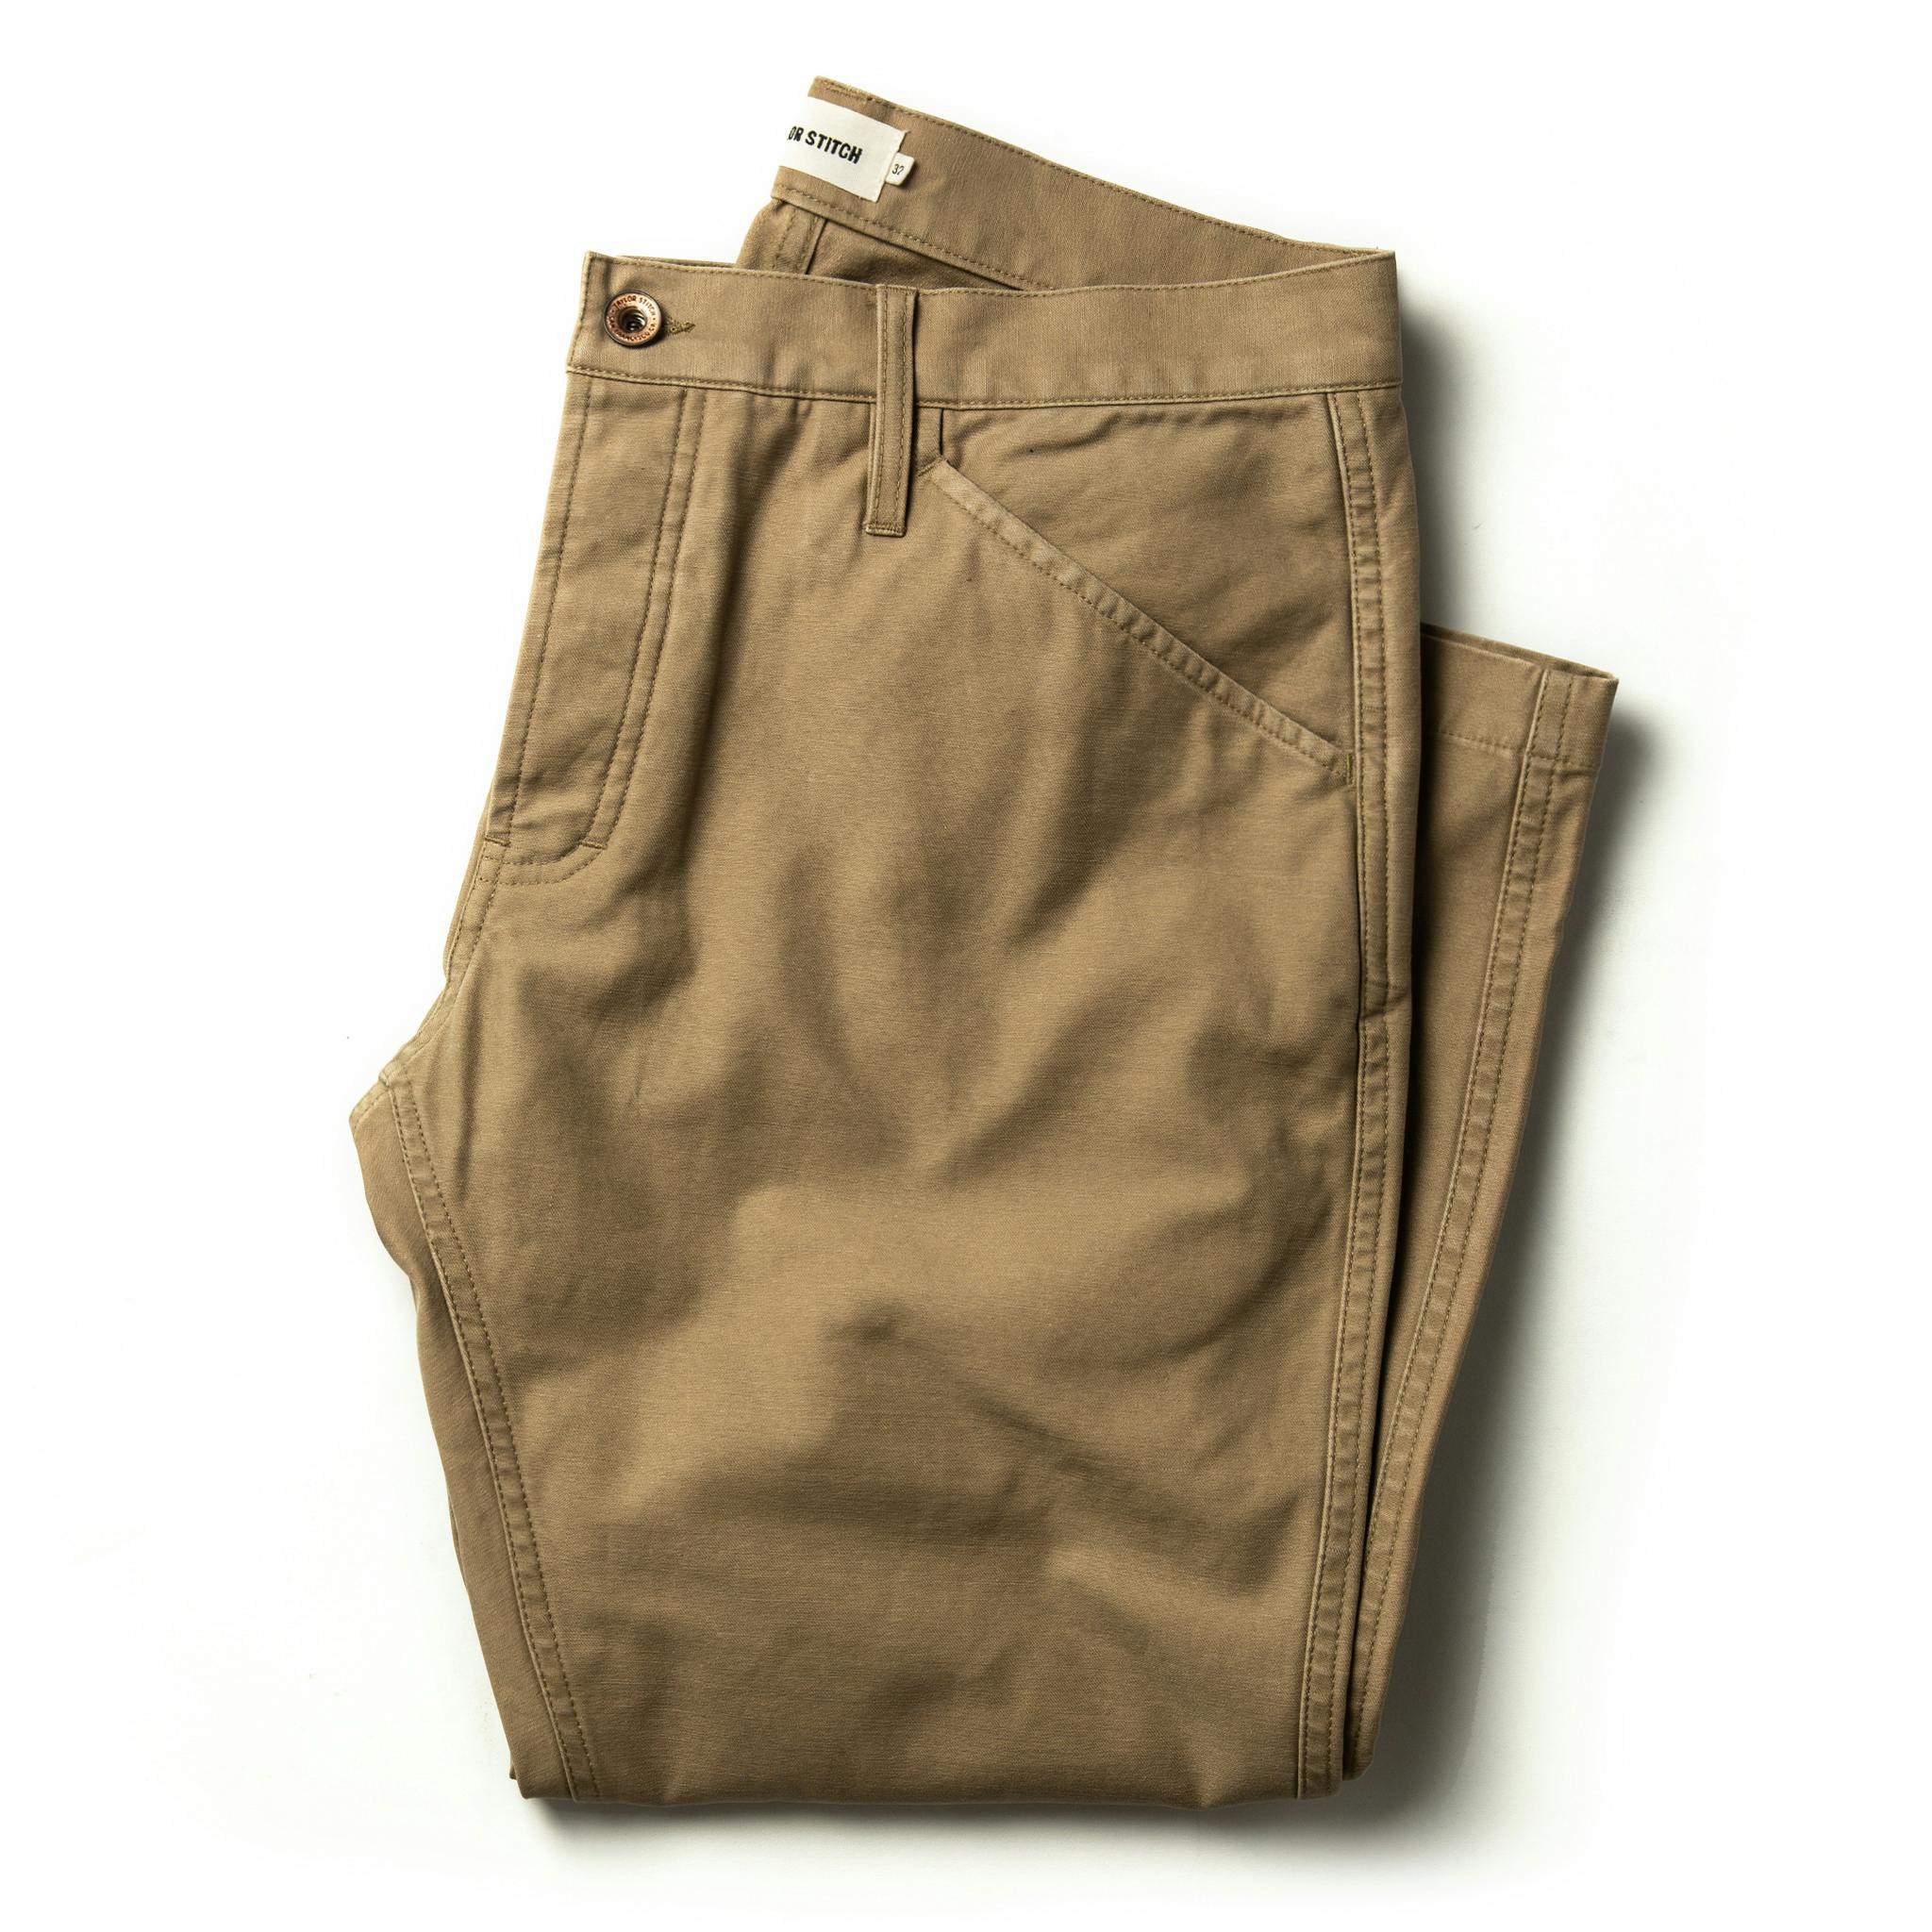 Taylor Stitch The Camp Pant